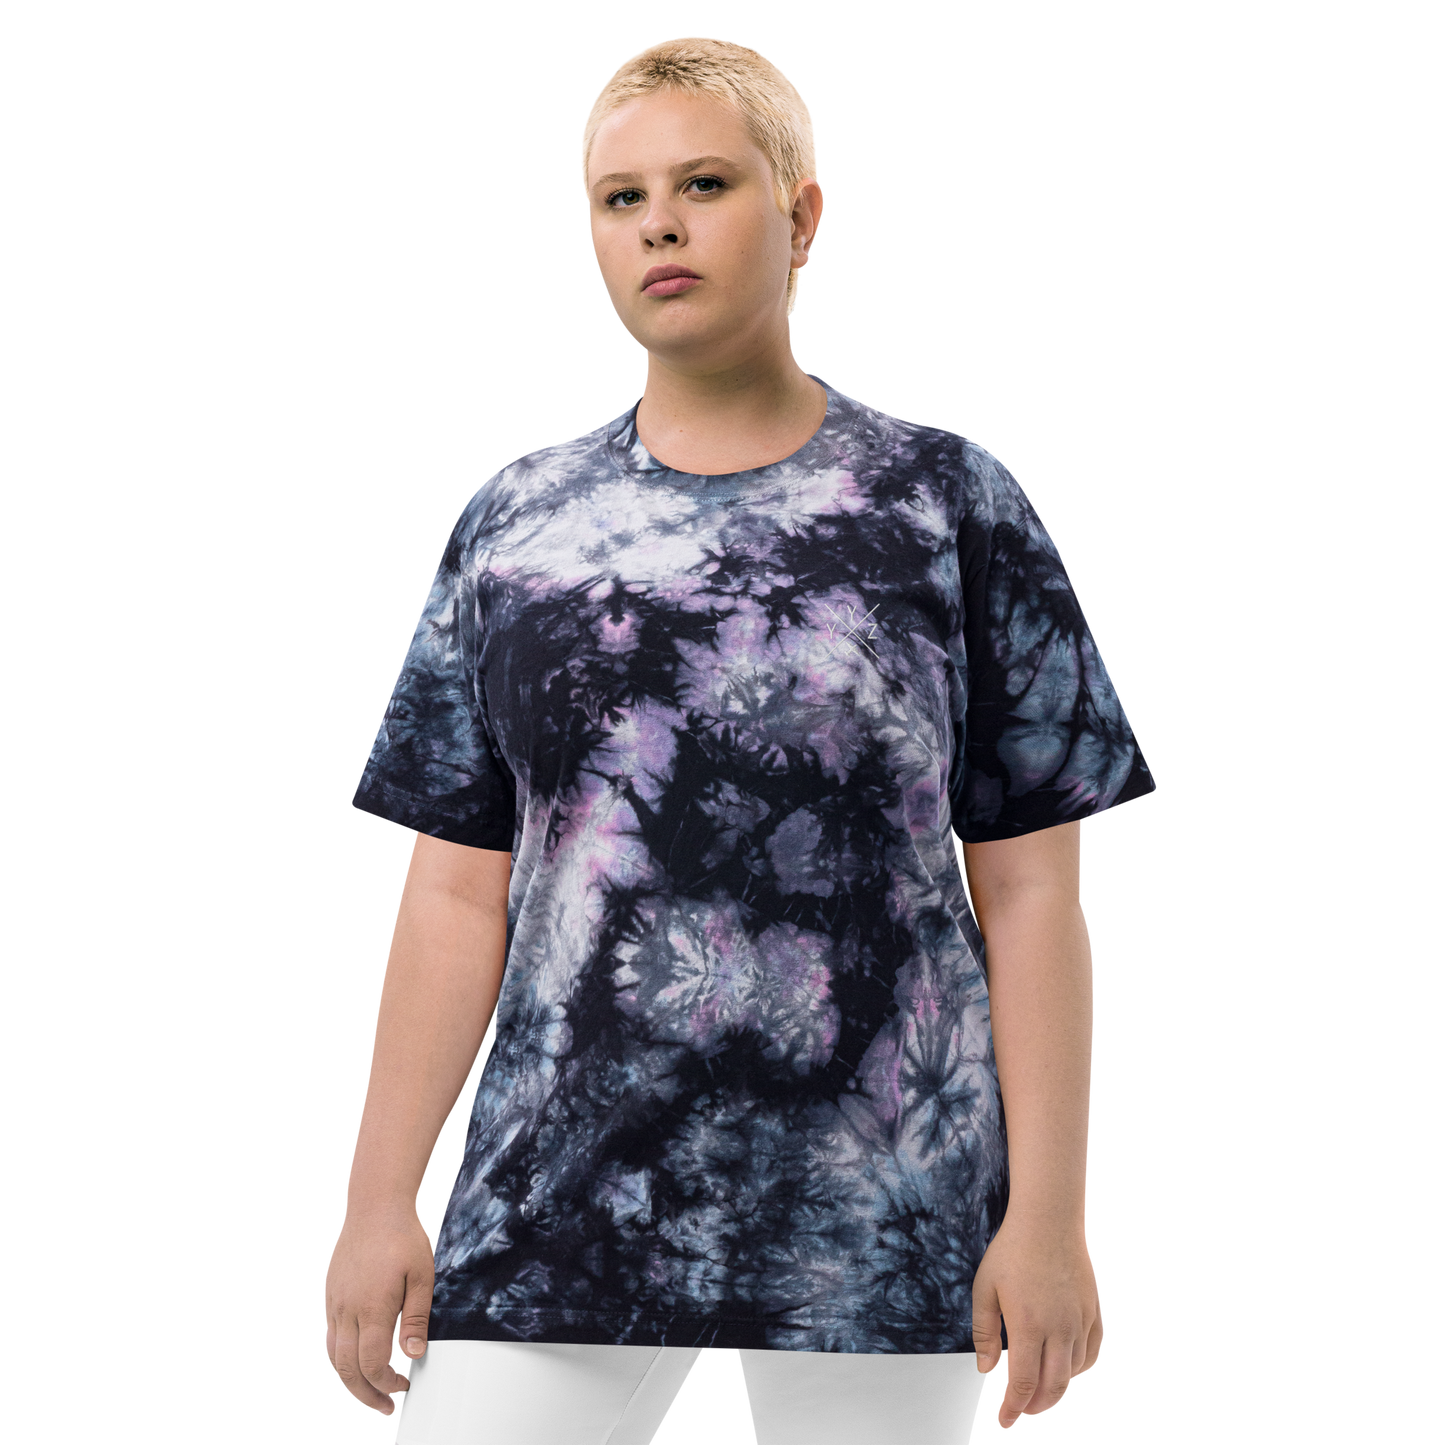 YHM Designs - YYZ Toronto Oversized Tie-Dye T-Shirt - Crossed-X Design with Airport Code and Vintage Propliner - White Embroidery - Image 05